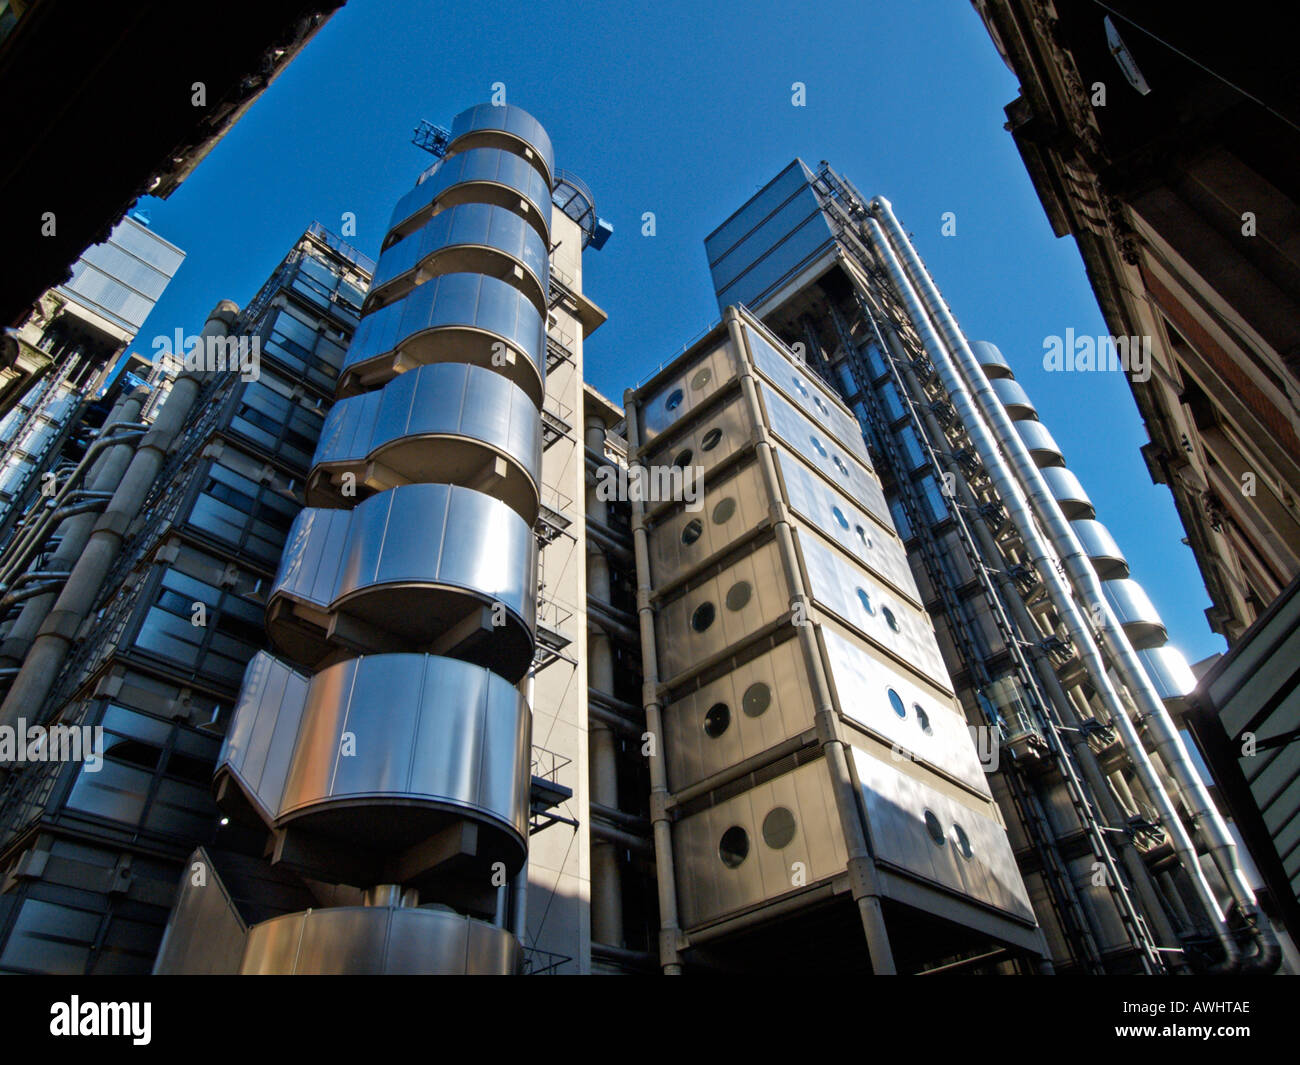 The ultramodern Lloyds building by architect Richard Rogers in the heart of the city in London UK Stock Photo